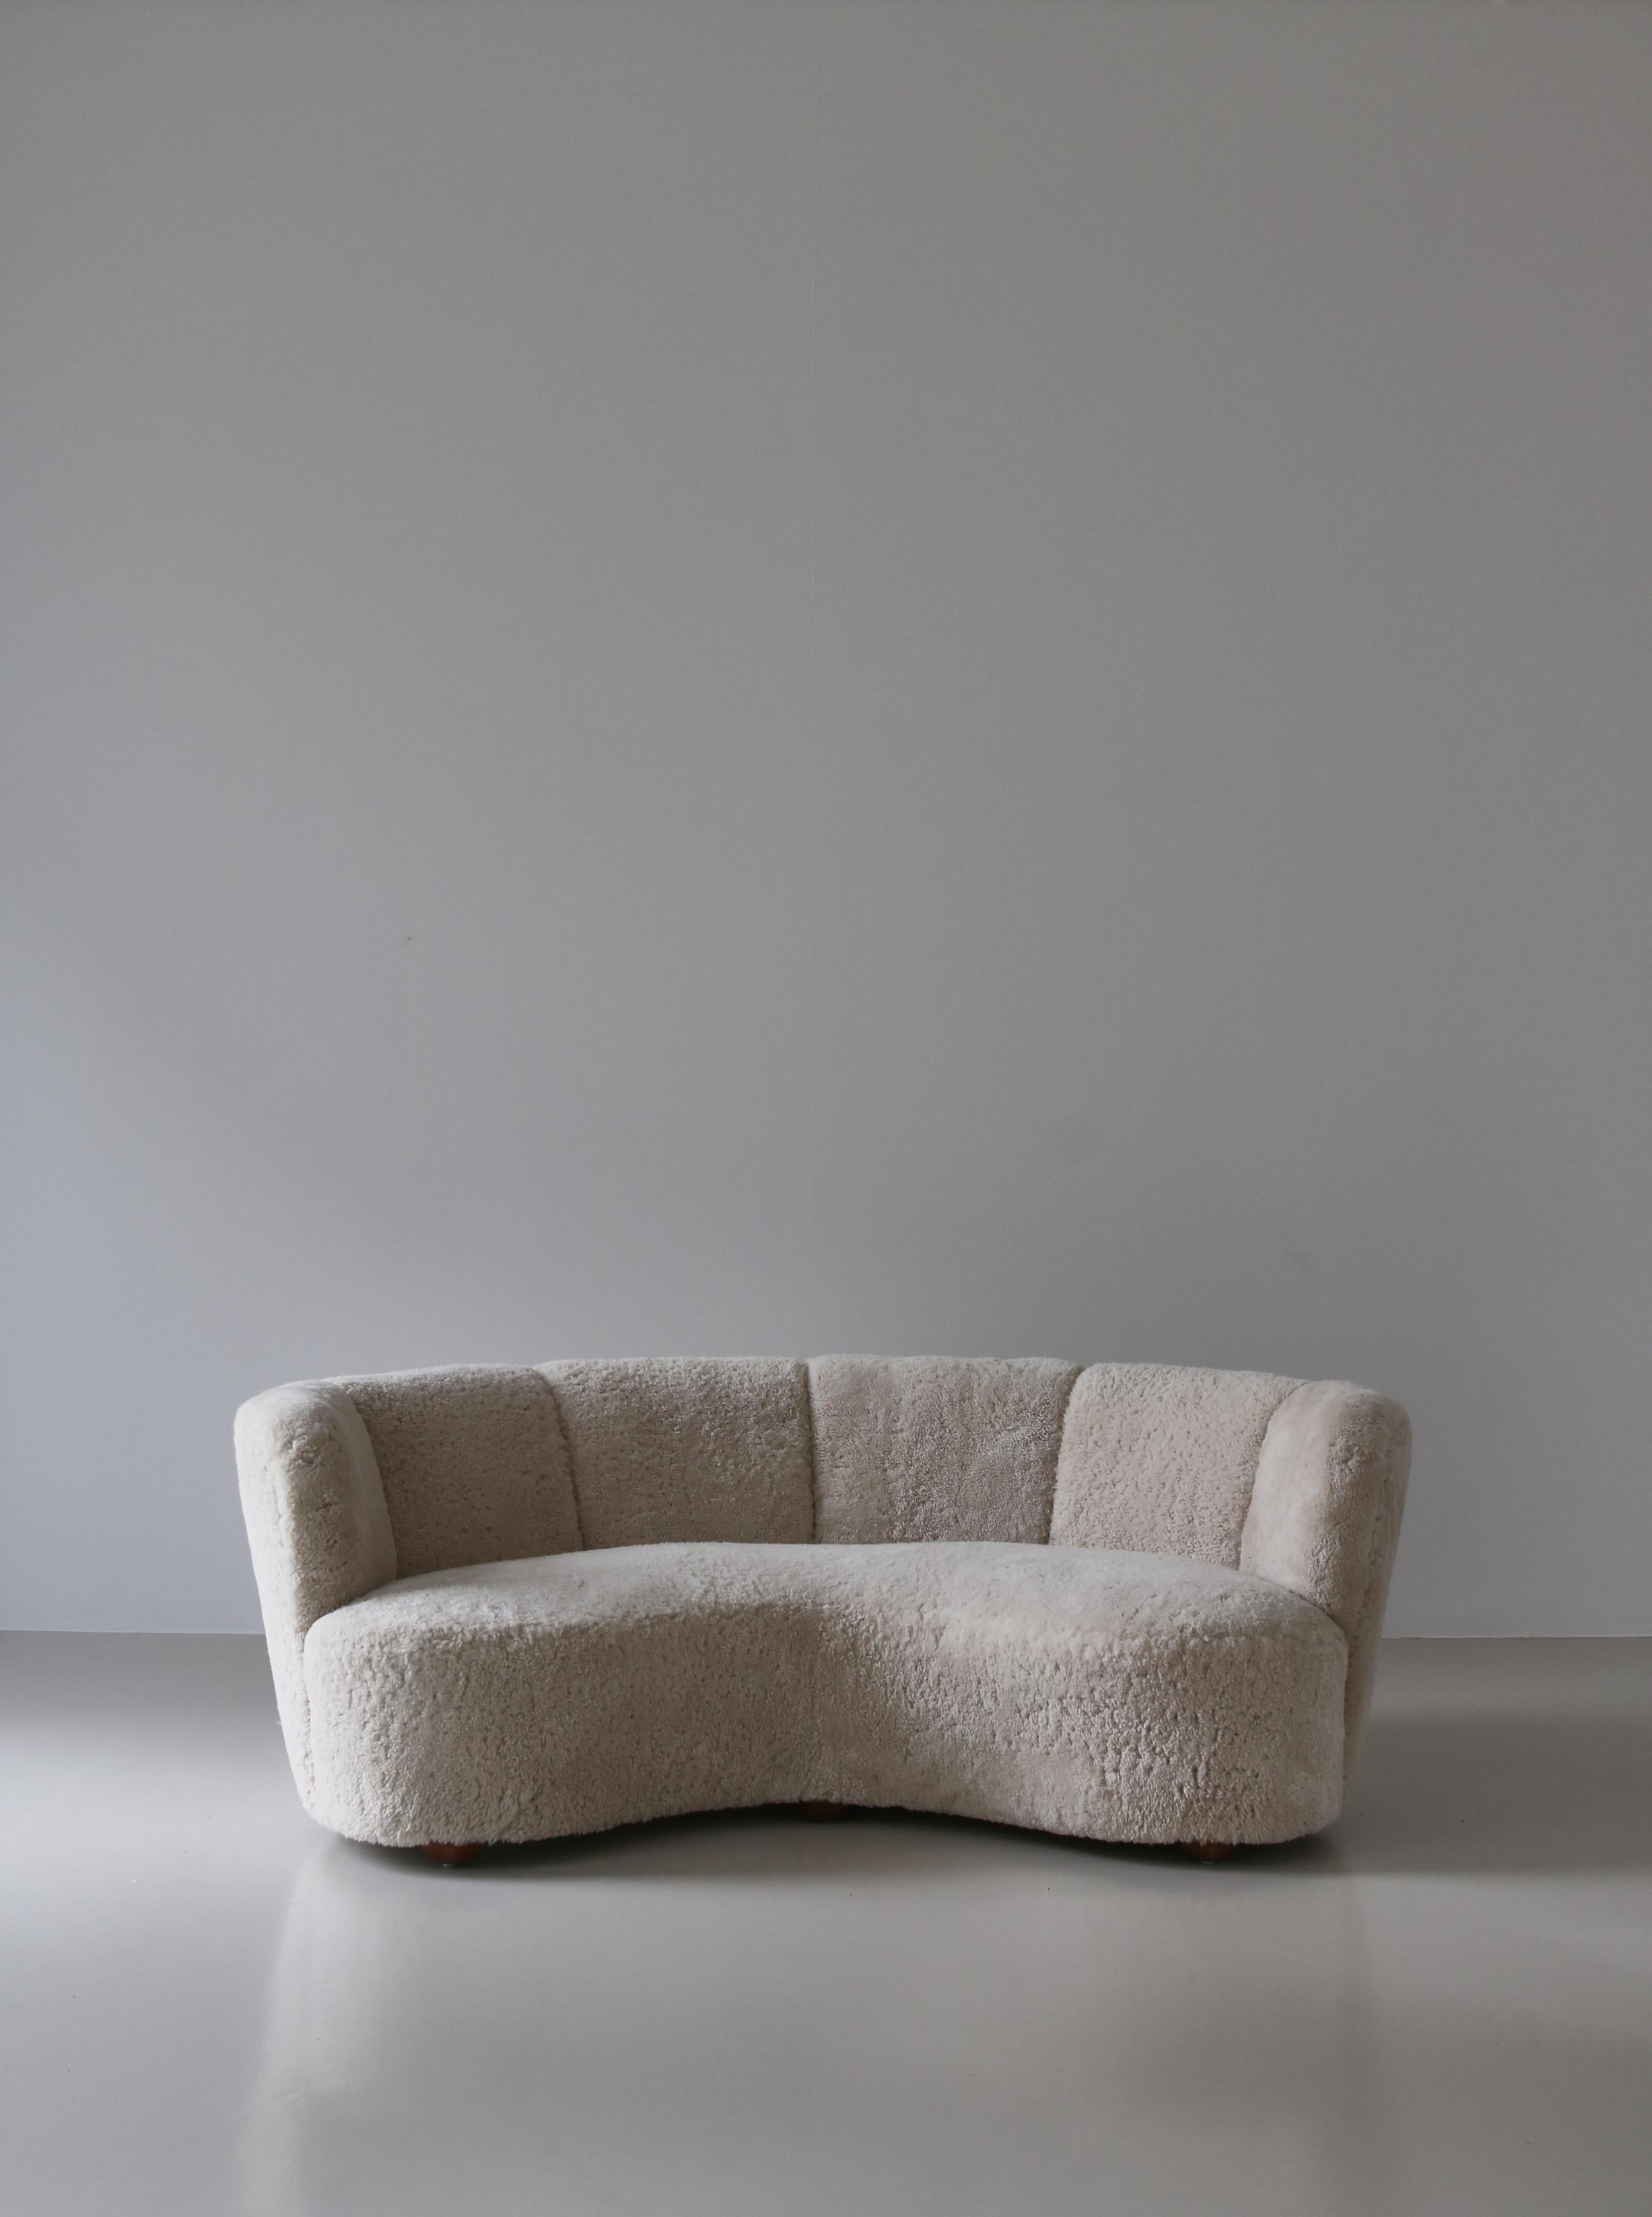 Beautiful and authentic banana sofa made in Denmark in the 1940s by a Danish cabinetmaker. This voluptuous sofa is based on a solid construction of round shapes and curvaceous lines. The seating area and the backrest are organically shaped and